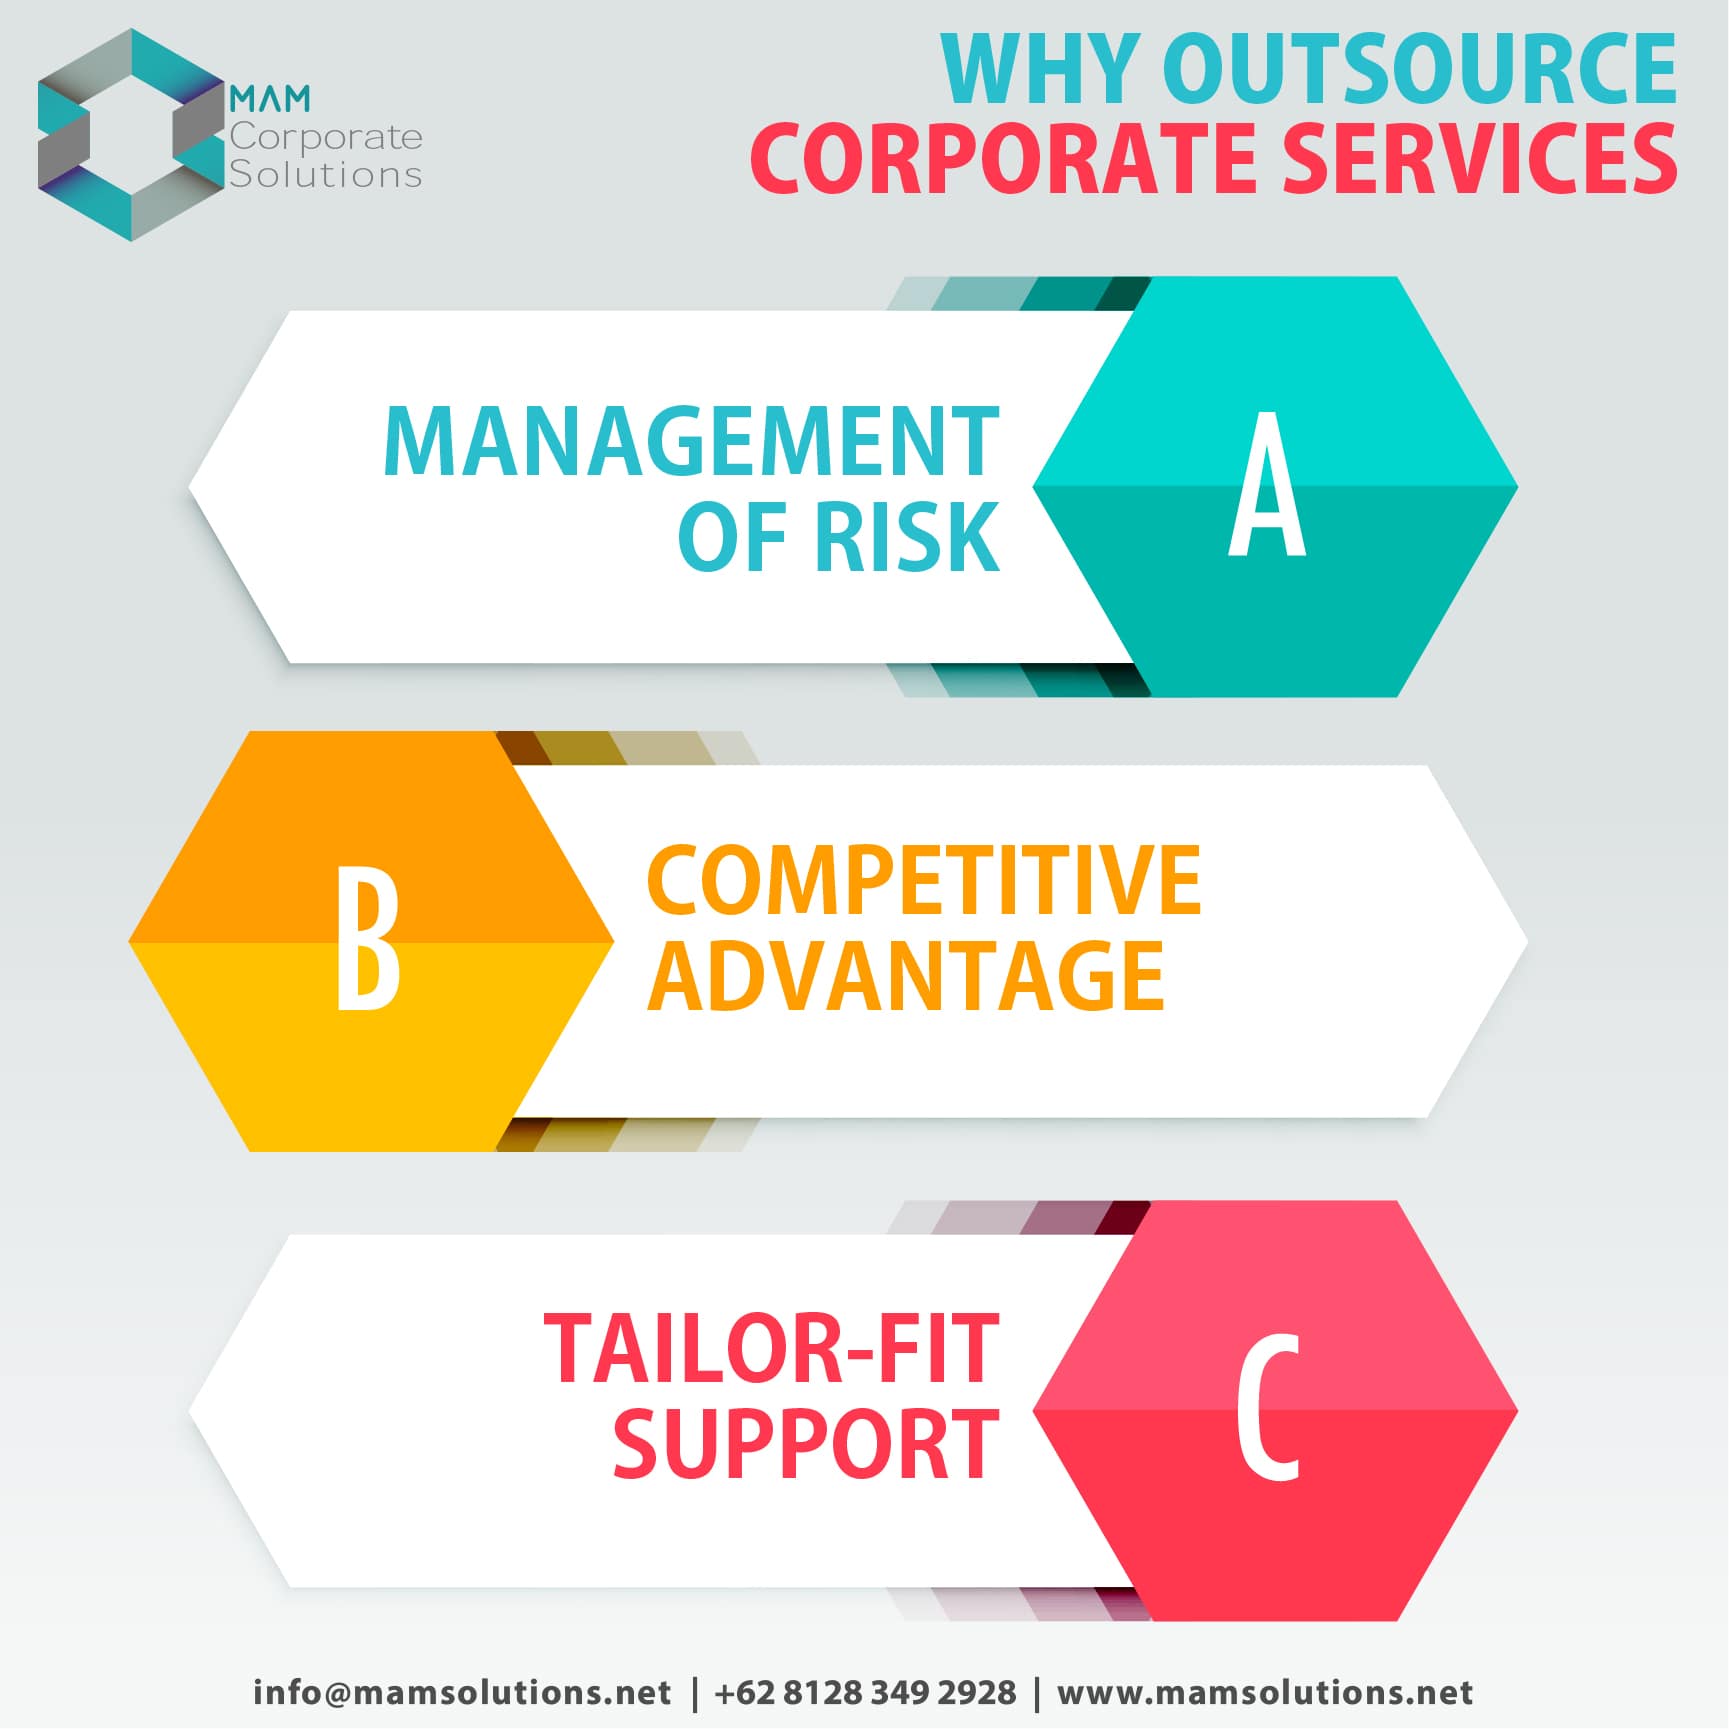 Why outsource corporate services to MAM Corporate Solutions